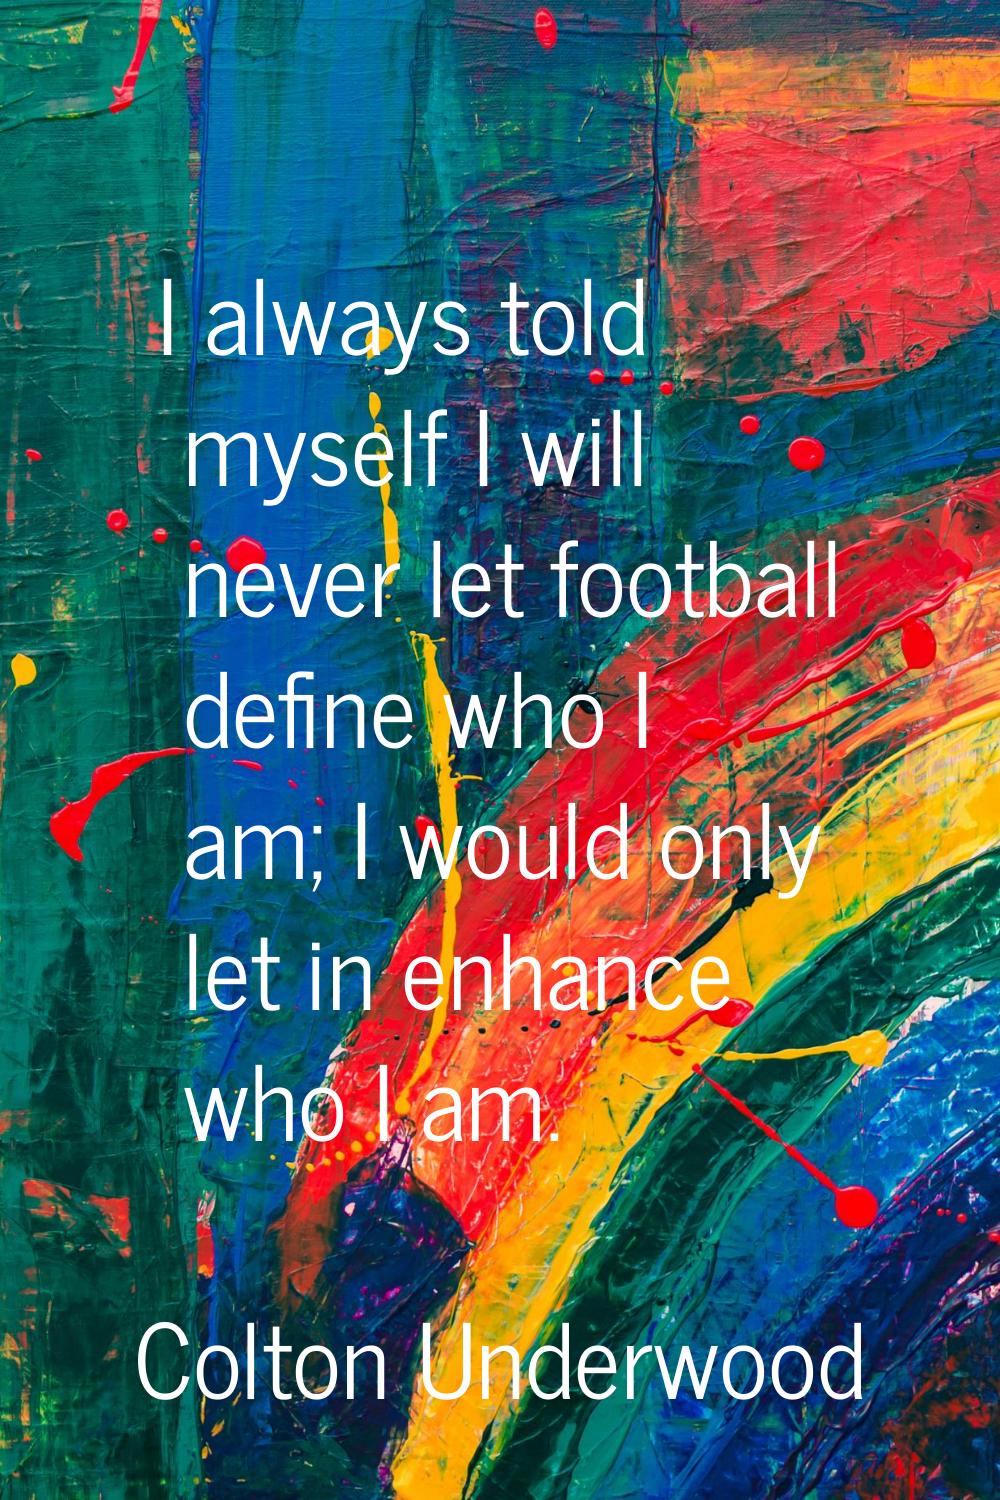 I always told myself I will never let football define who I am; I would only let in enhance who I a